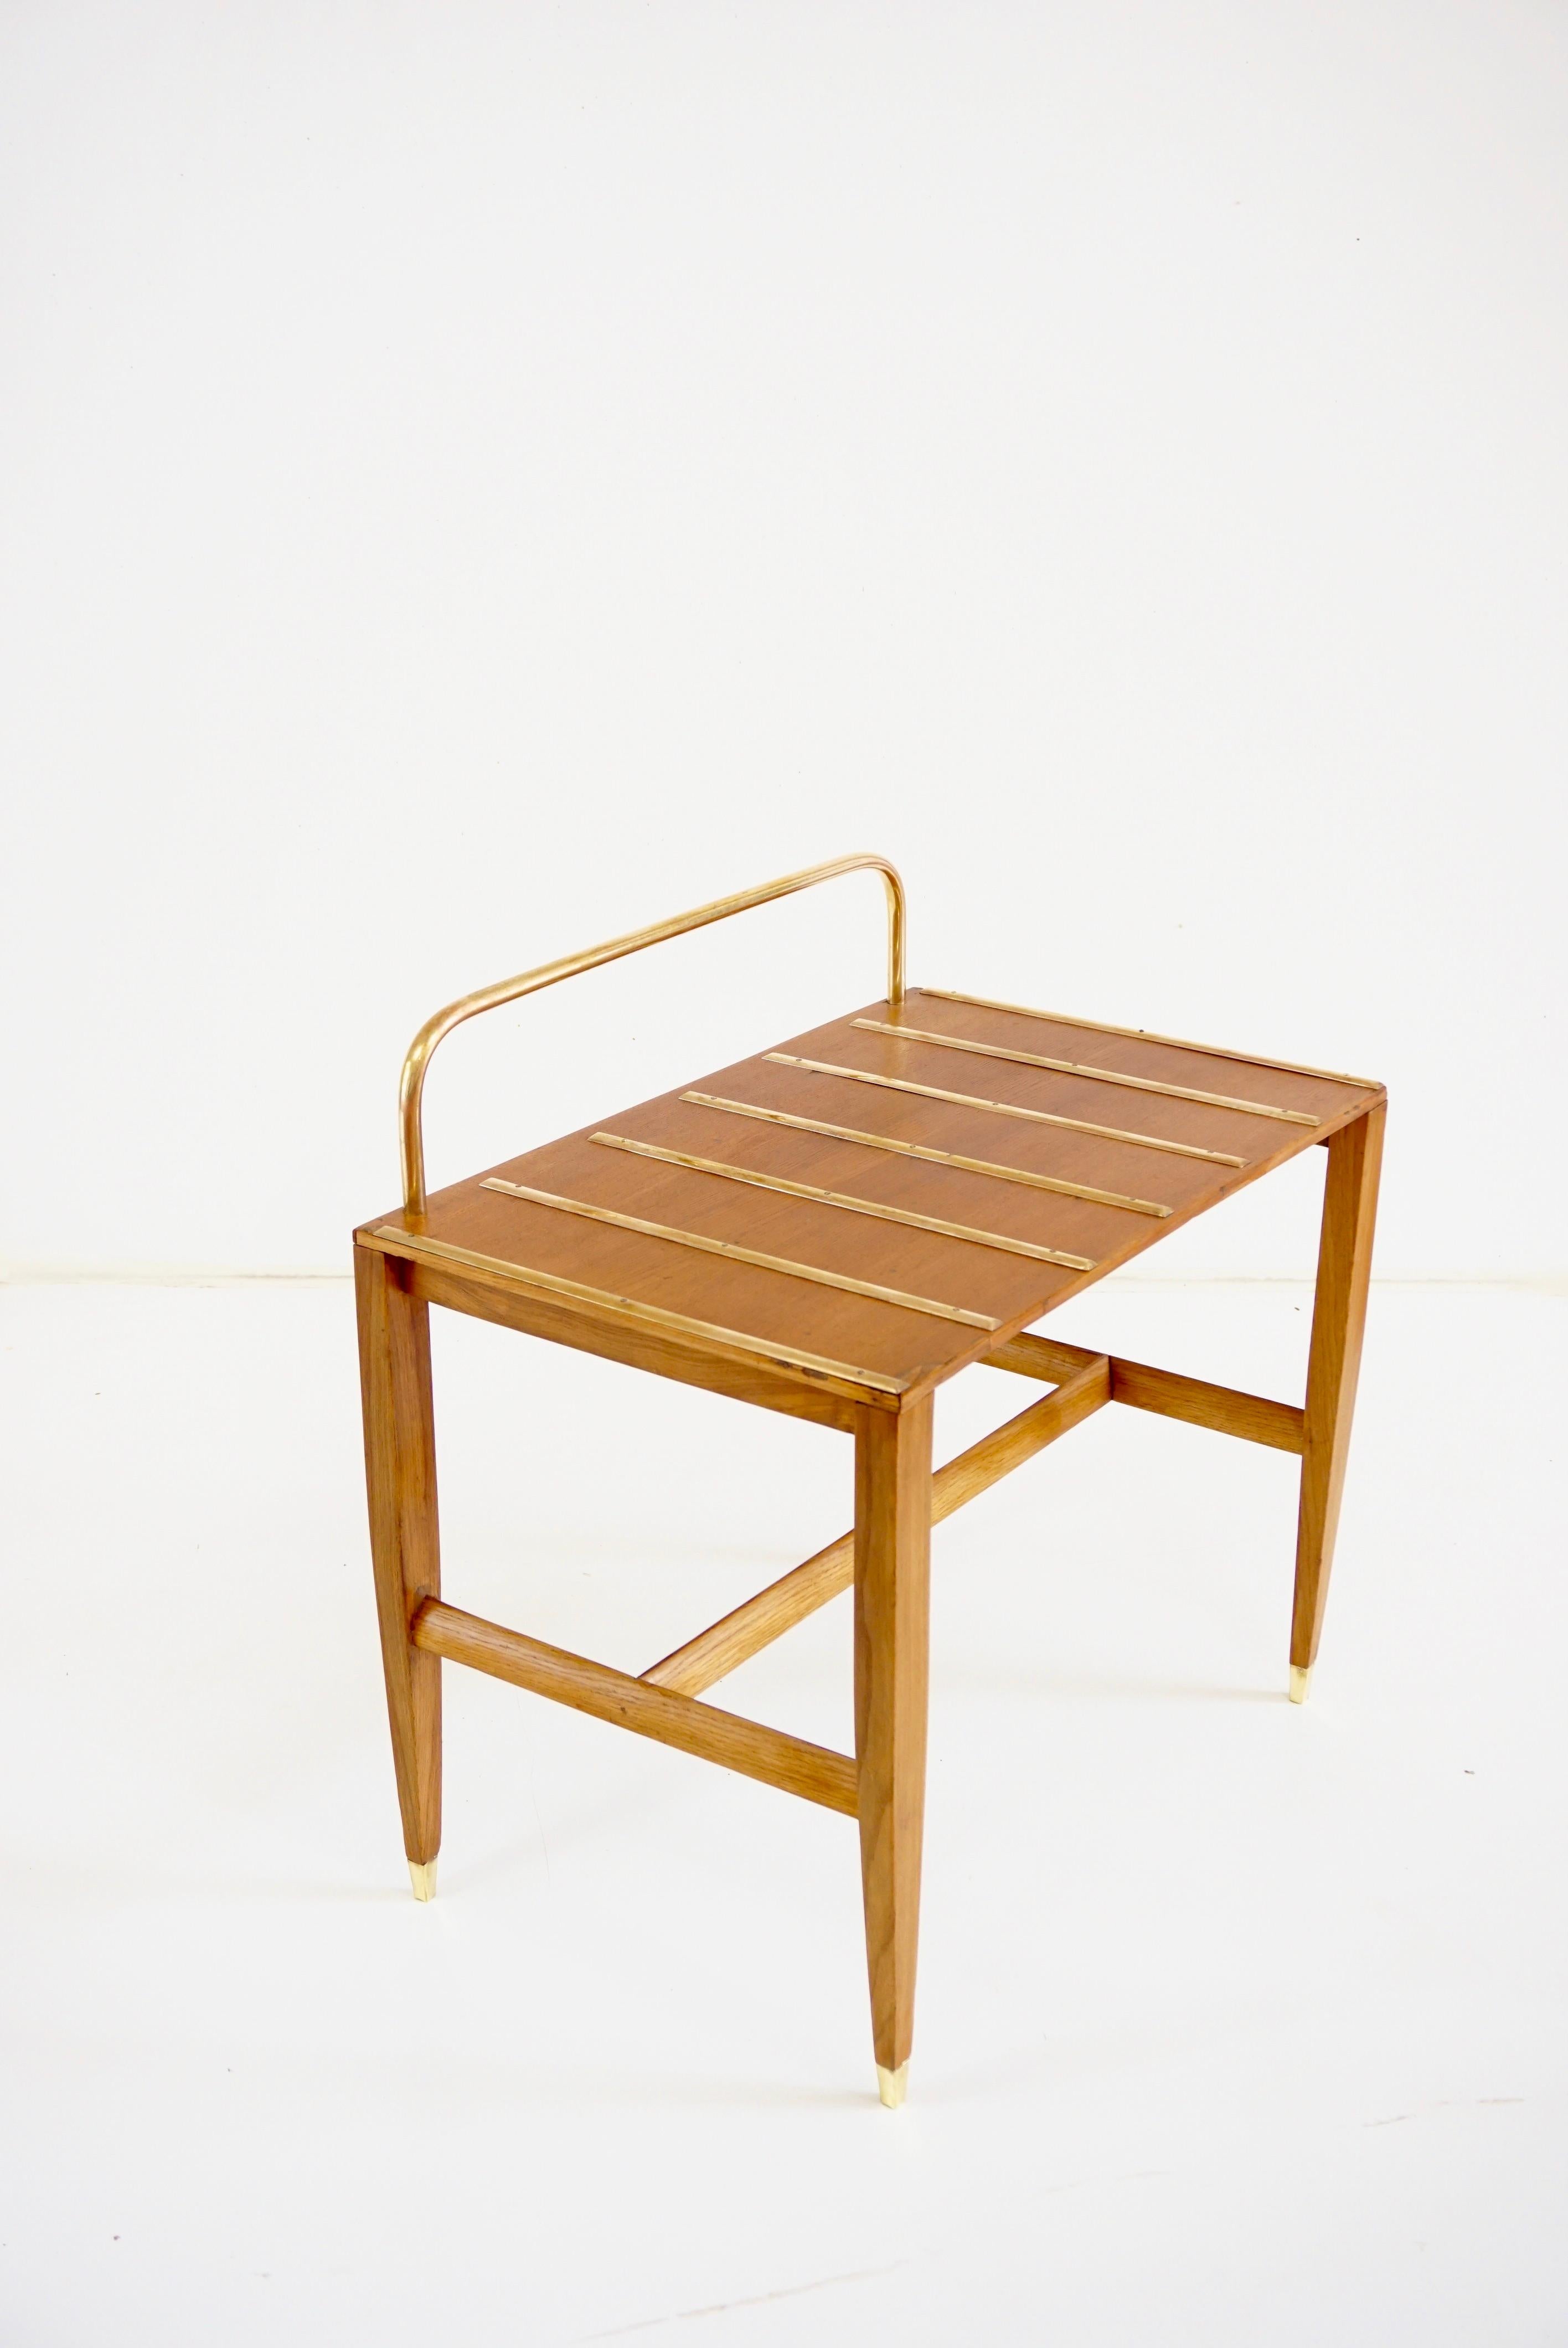 Mid-20th Century Gio Ponti Walnut Side Table, Luggage Rack for Hotel Royal Naples, 1955 For Sale